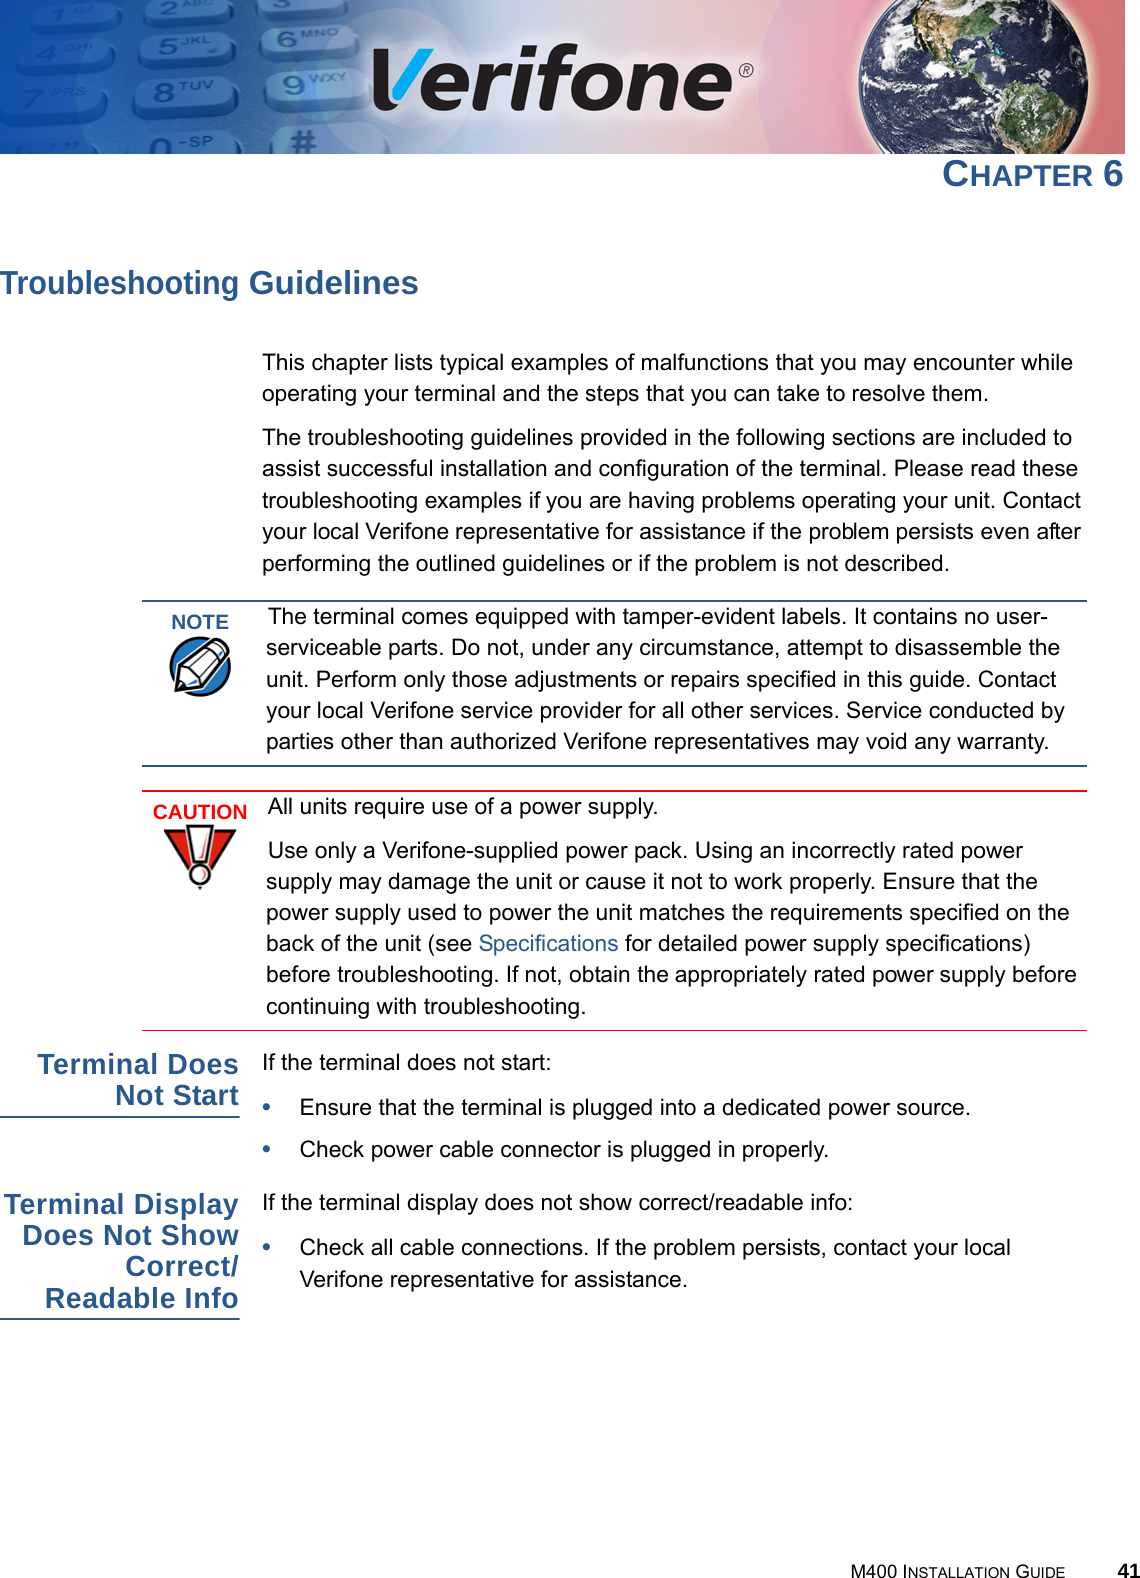 M400 INSTALLATION GUIDE 41CHAPTER 6Troubleshooting GuidelinesThis chapter lists typical examples of malfunctions that you may encounter while operating your terminal and the steps that you can take to resolve them.The troubleshooting guidelines provided in the following sections are included to assist successful installation and configuration of the terminal. Please read these troubleshooting examples if you are having problems operating your unit. Contact your local Verifone representative for assistance if the problem persists even after performing the outlined guidelines or if the problem is not described.Terminal DoesNot StartIf the terminal does not start:•Ensure that the terminal is plugged into a dedicated power source.•Check power cable connector is plugged in properly.Terminal DisplayDoes Not ShowCorrect/Readable InfoIf the terminal display does not show correct/readable info:•Check all cable connections. If the problem persists, contact your local Verifone representative for assistance.NOTEThe terminal comes equipped with tamper-evident labels. It contains no user-serviceable parts. Do not, under any circumstance, attempt to disassemble the unit. Perform only those adjustments or repairs specified in this guide. Contact your local Verifone service provider for all other services. Service conducted by parties other than authorized Verifone representatives may void any warranty.CAUTIONAll units require use of a power supply.Use only a Verifone-supplied power pack. Using an incorrectly rated power supply may damage the unit or cause it not to work properly. Ensure that the power supply used to power the unit matches the requirements specified on the back of the unit (see Specifications for detailed power supply specifications) before troubleshooting. If not, obtain the appropriately rated power supply before continuing with troubleshooting.